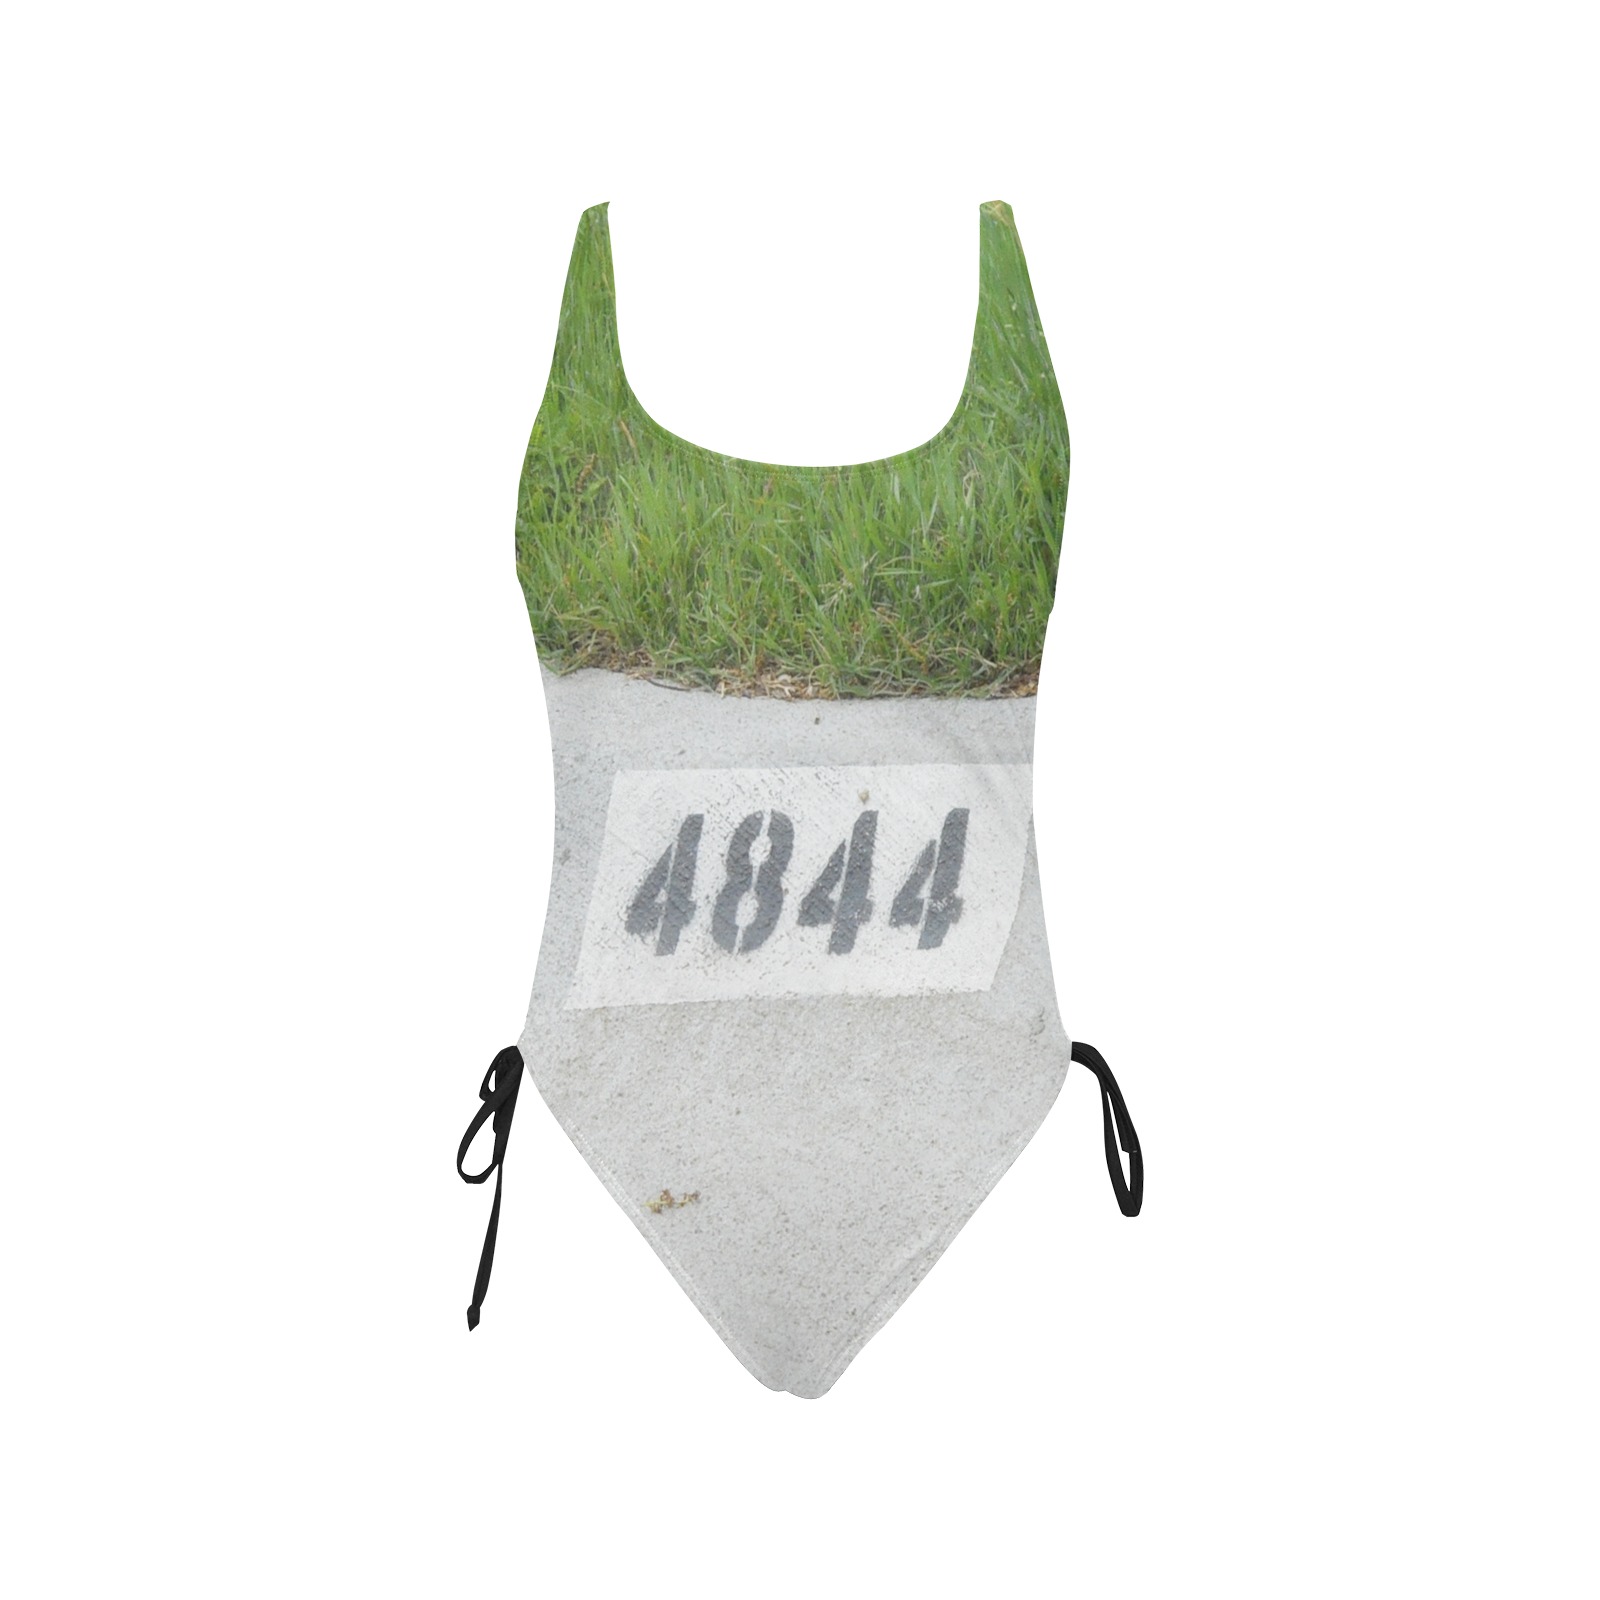 Street Number 4844 Drawstring Side One-Piece Swimsuit (Model S14)